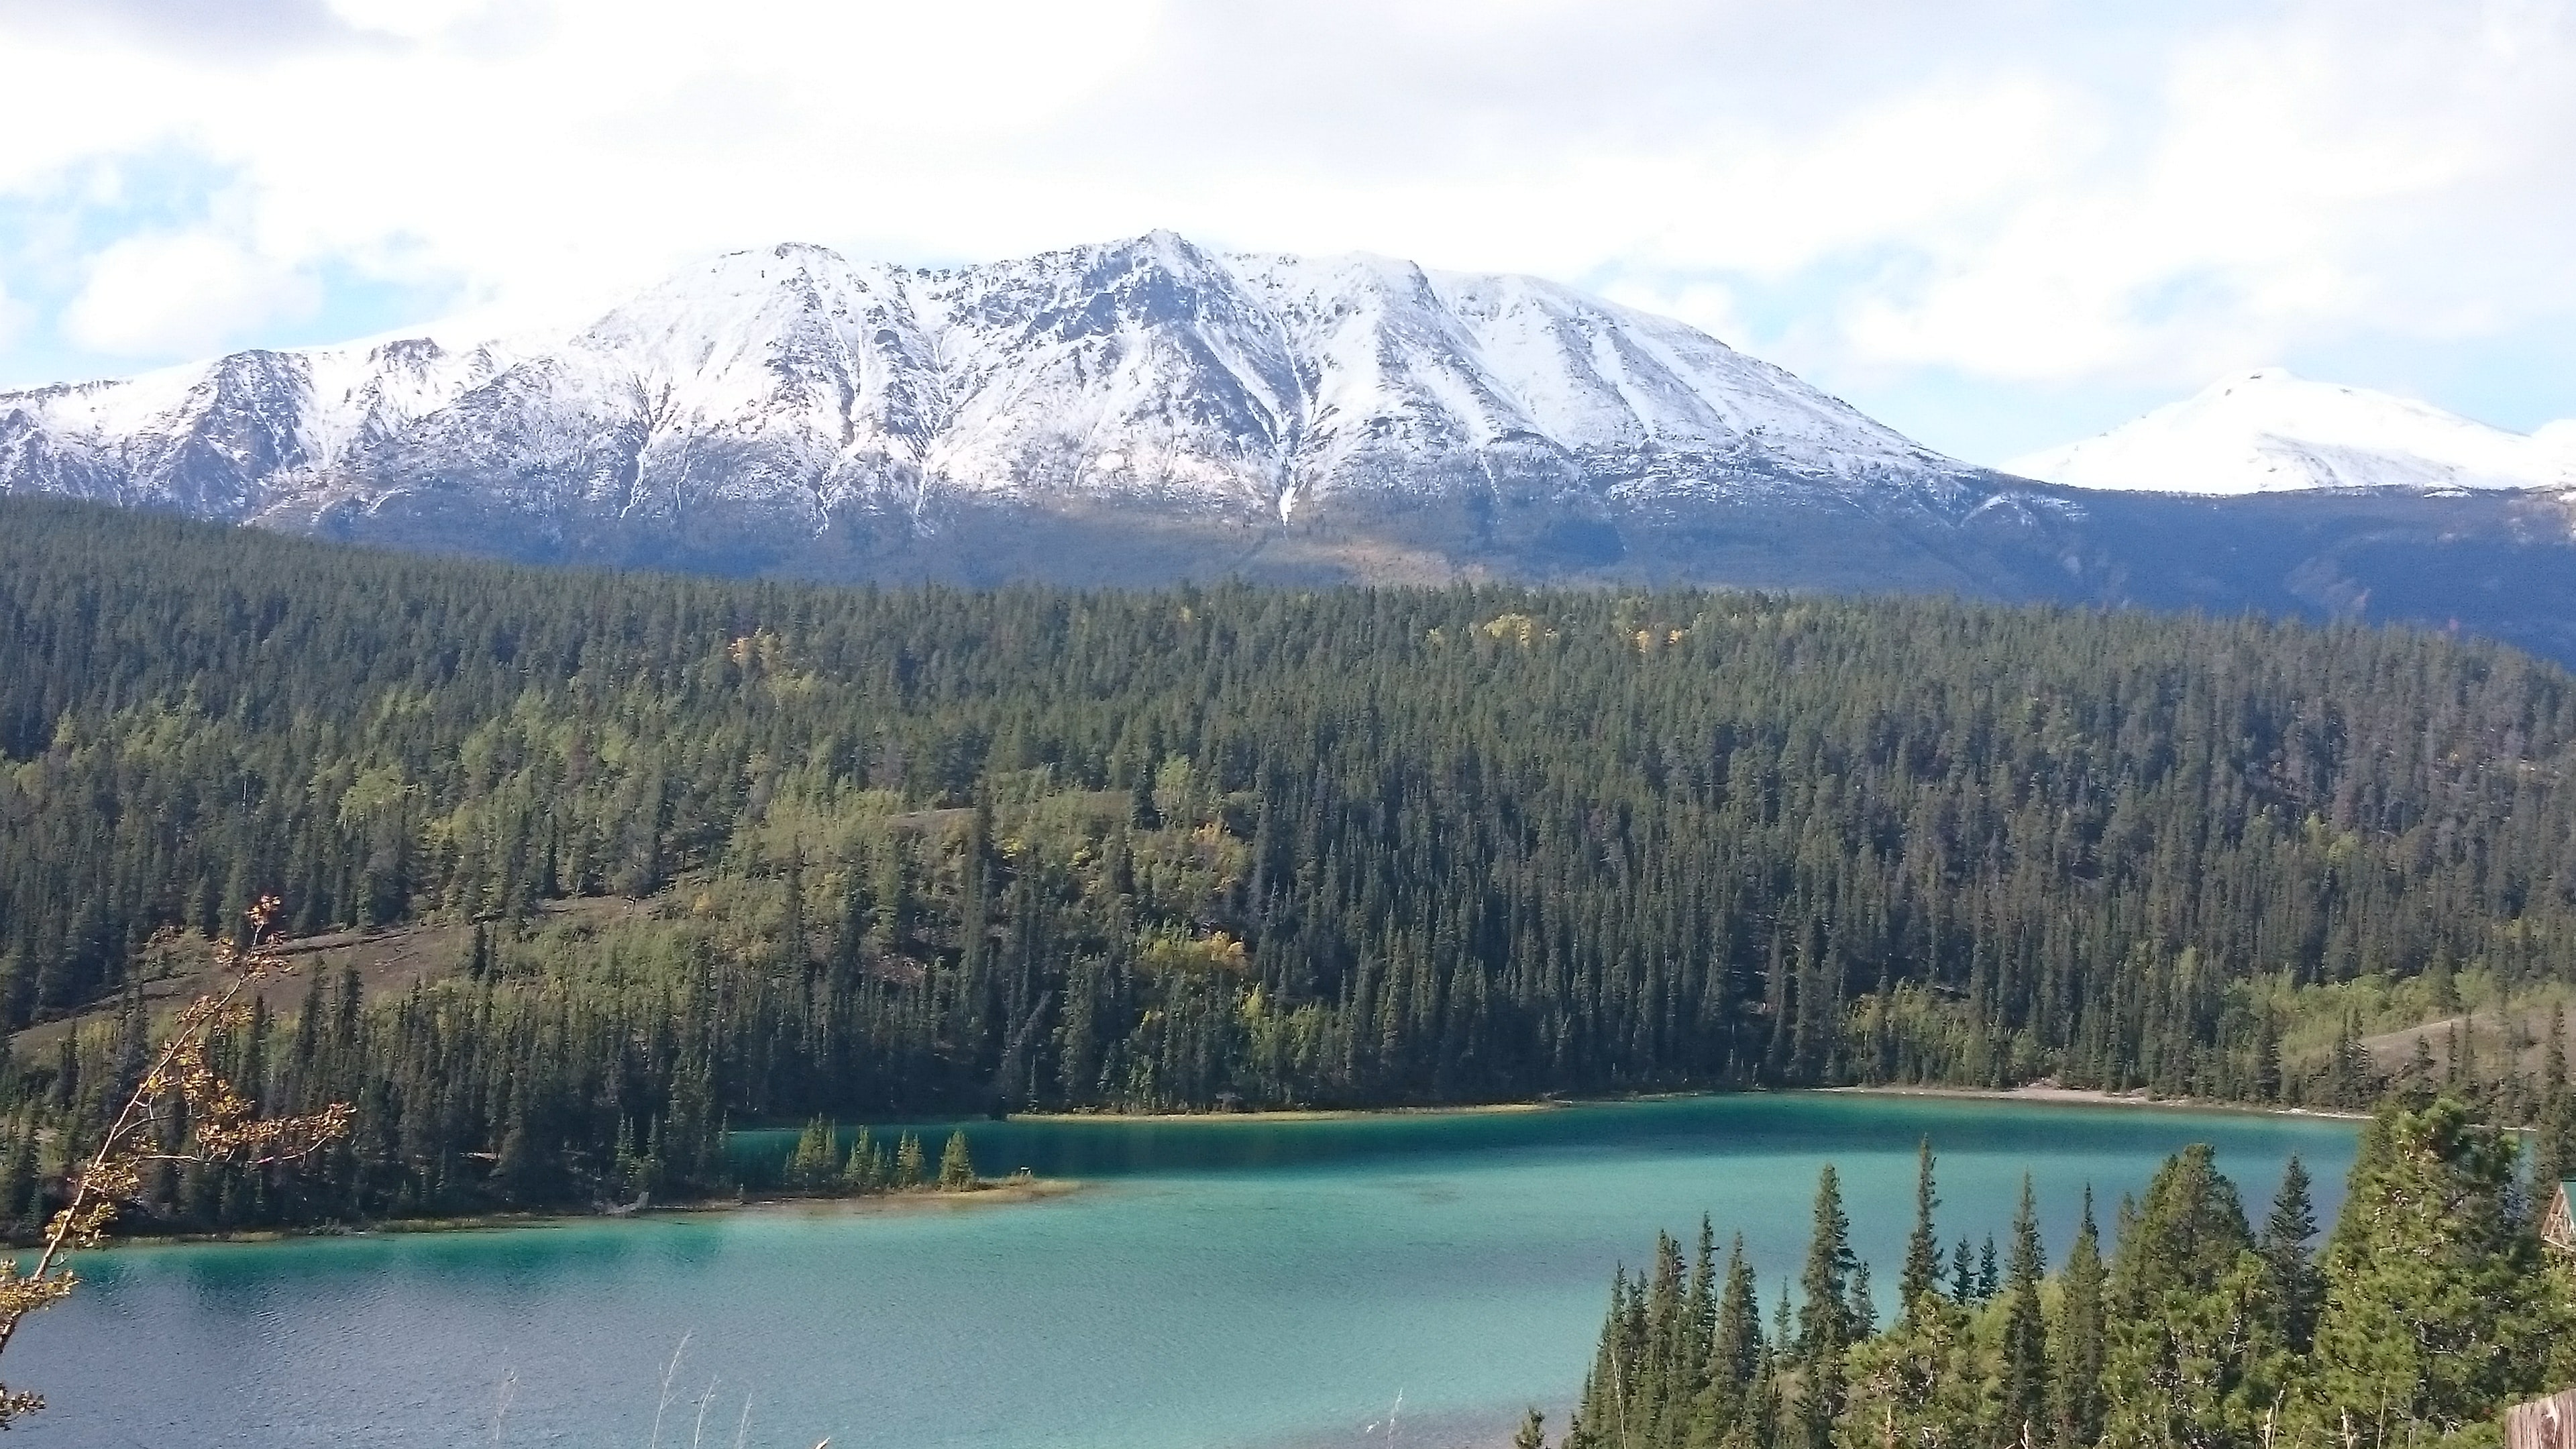 Emerald Lake Yukon, a blue-green lake in front of a green pine forest. A snow capped mountain in the background.